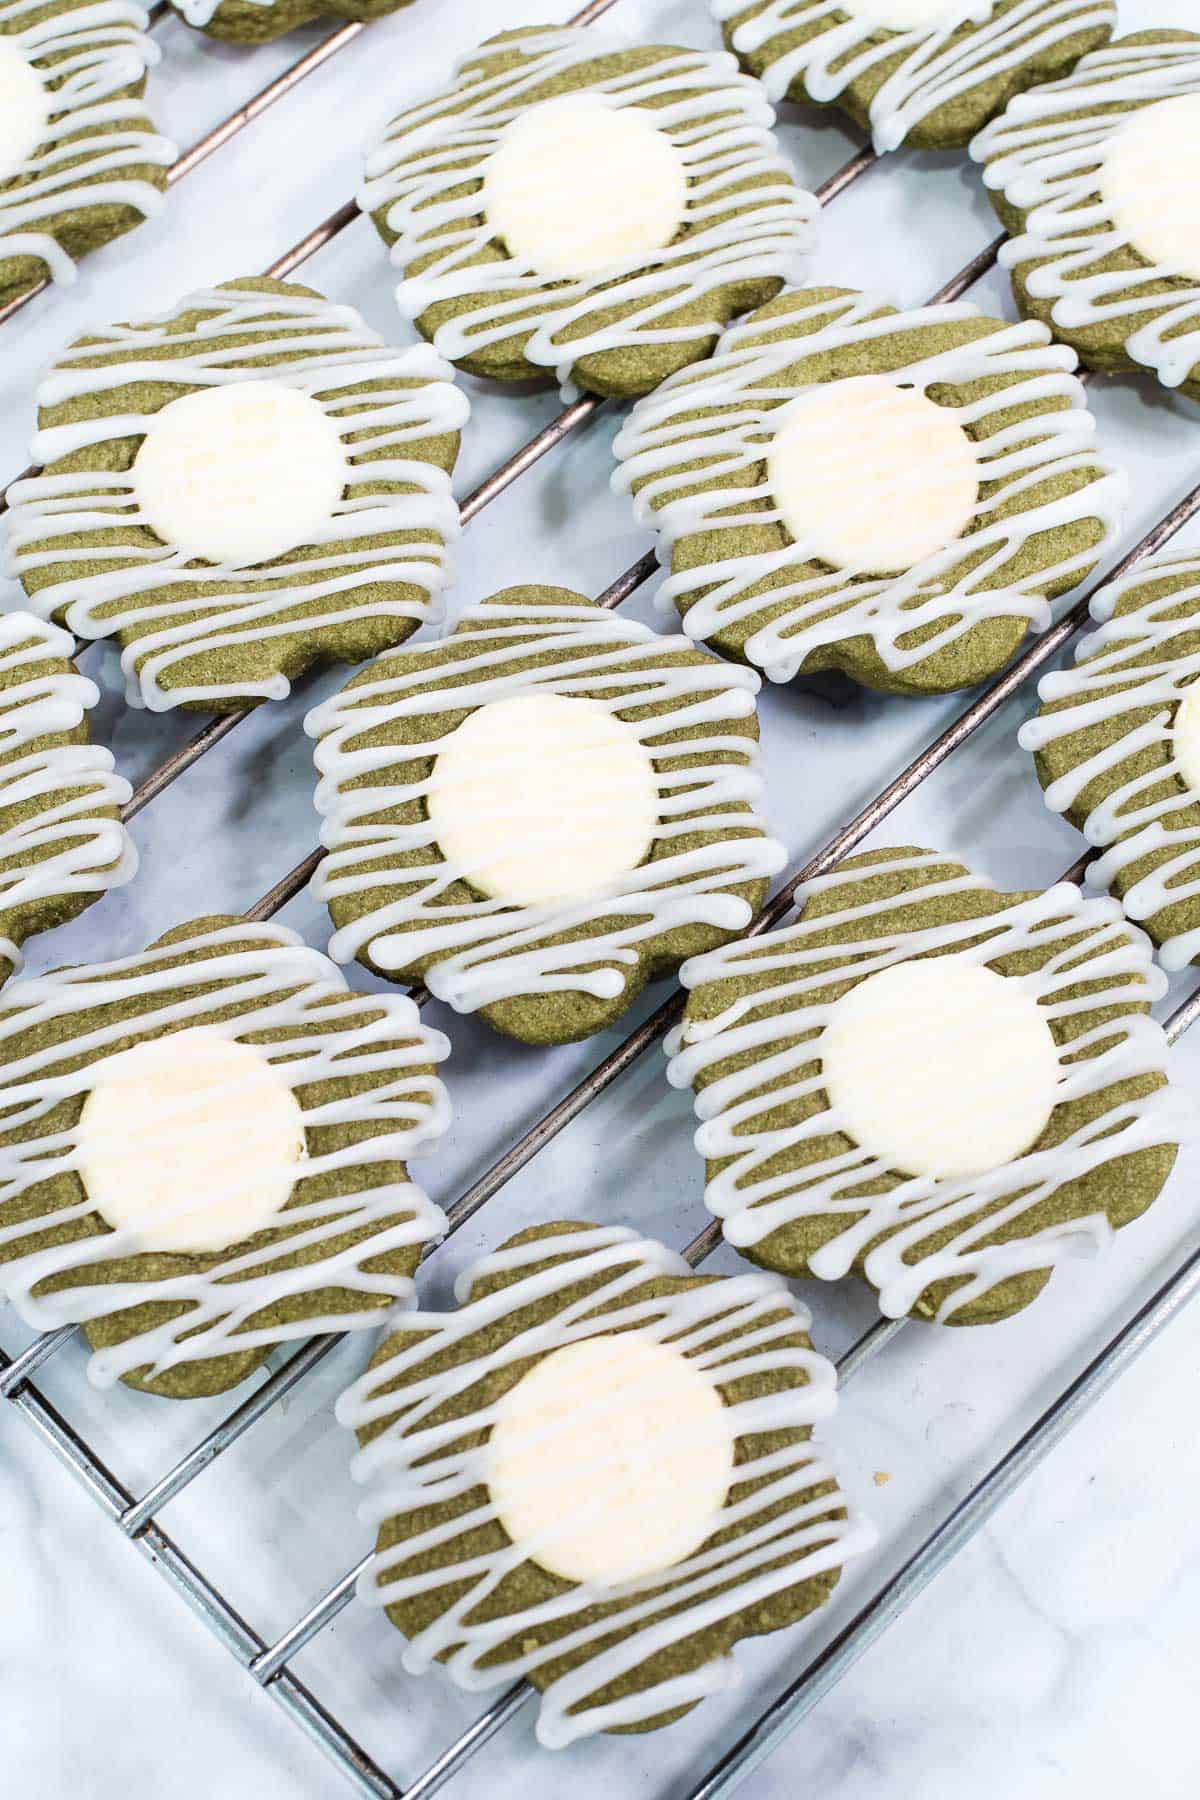 Green flower shaped cookies with white centers and icing drizzle, arranged on a wire rack